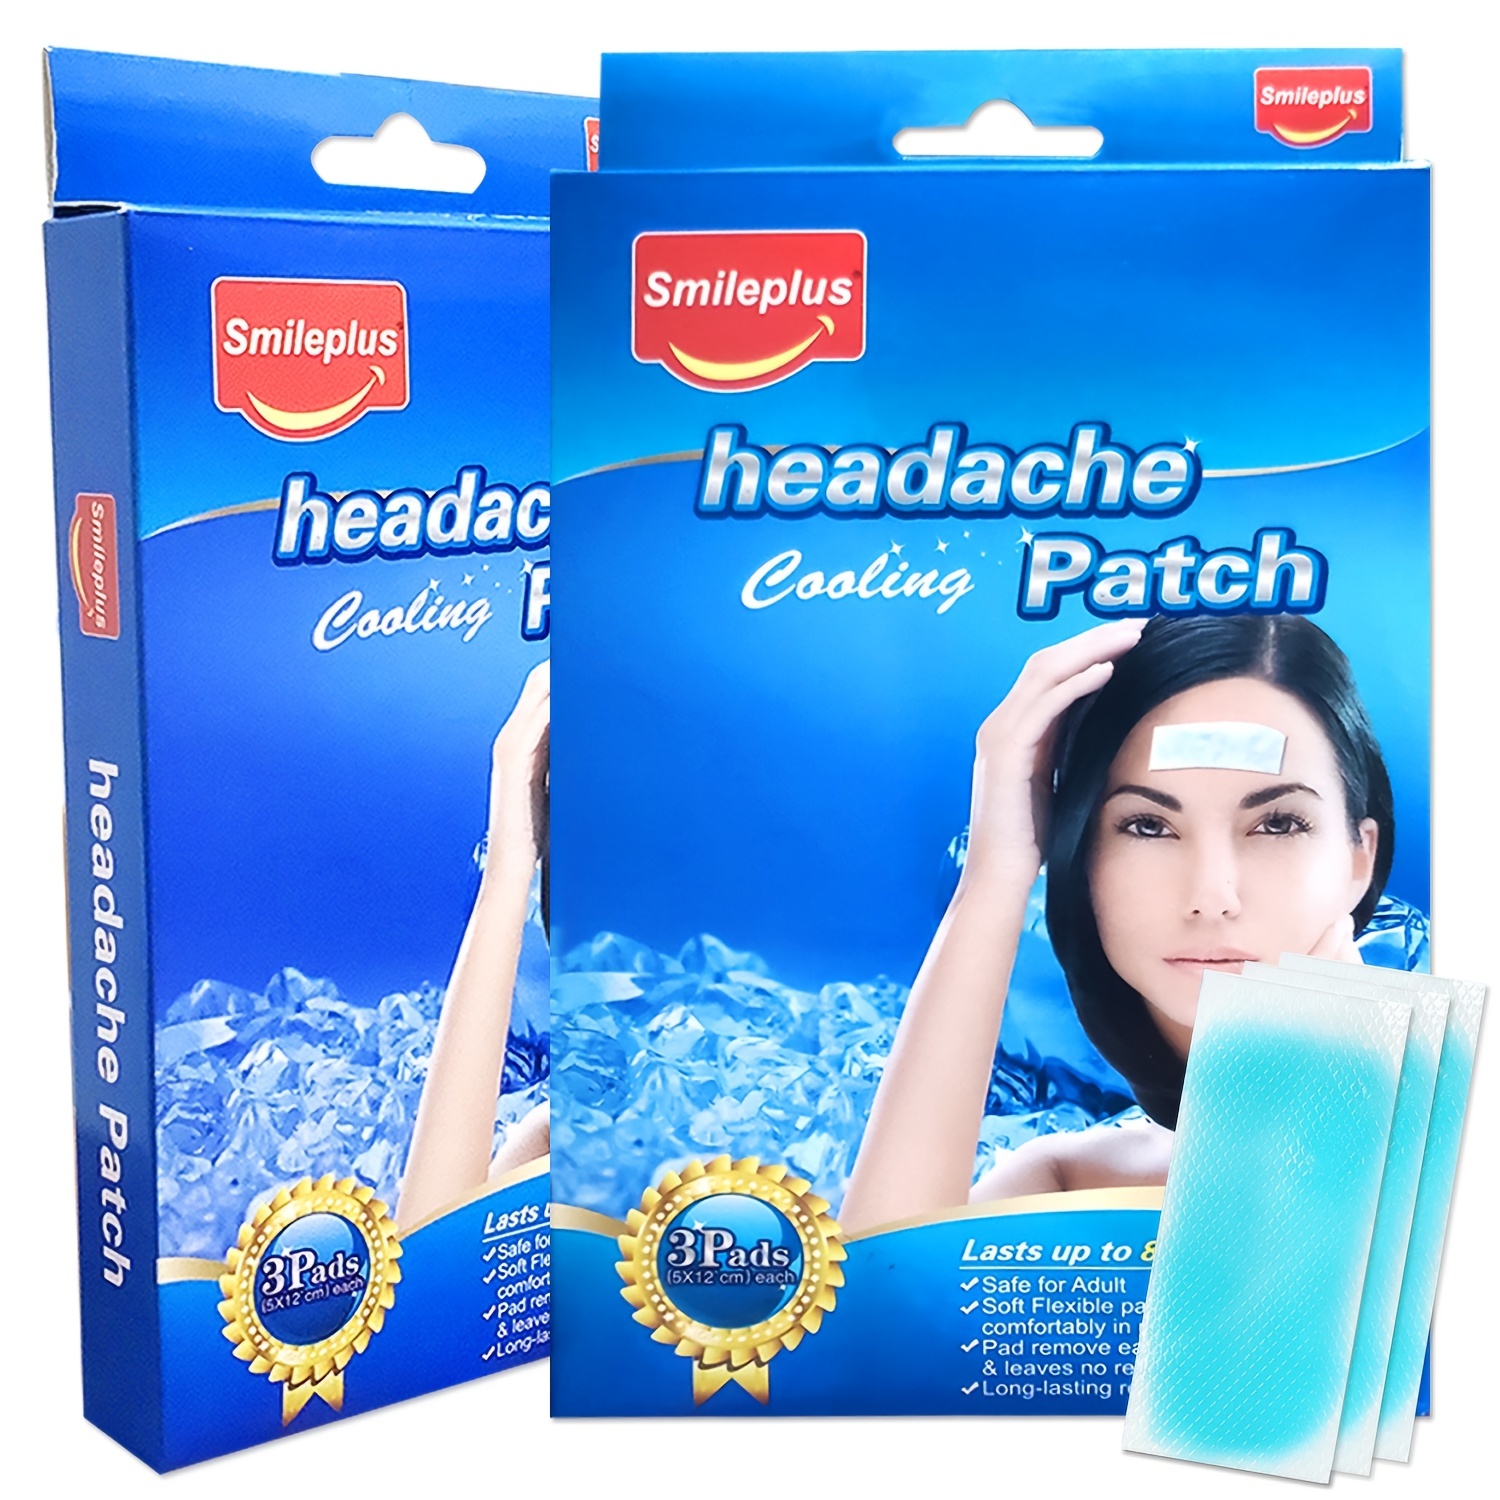 2 Pack Well Patch Cooling Headache Pads Migraine 4 In A Box Lasts Up To 8  Hours